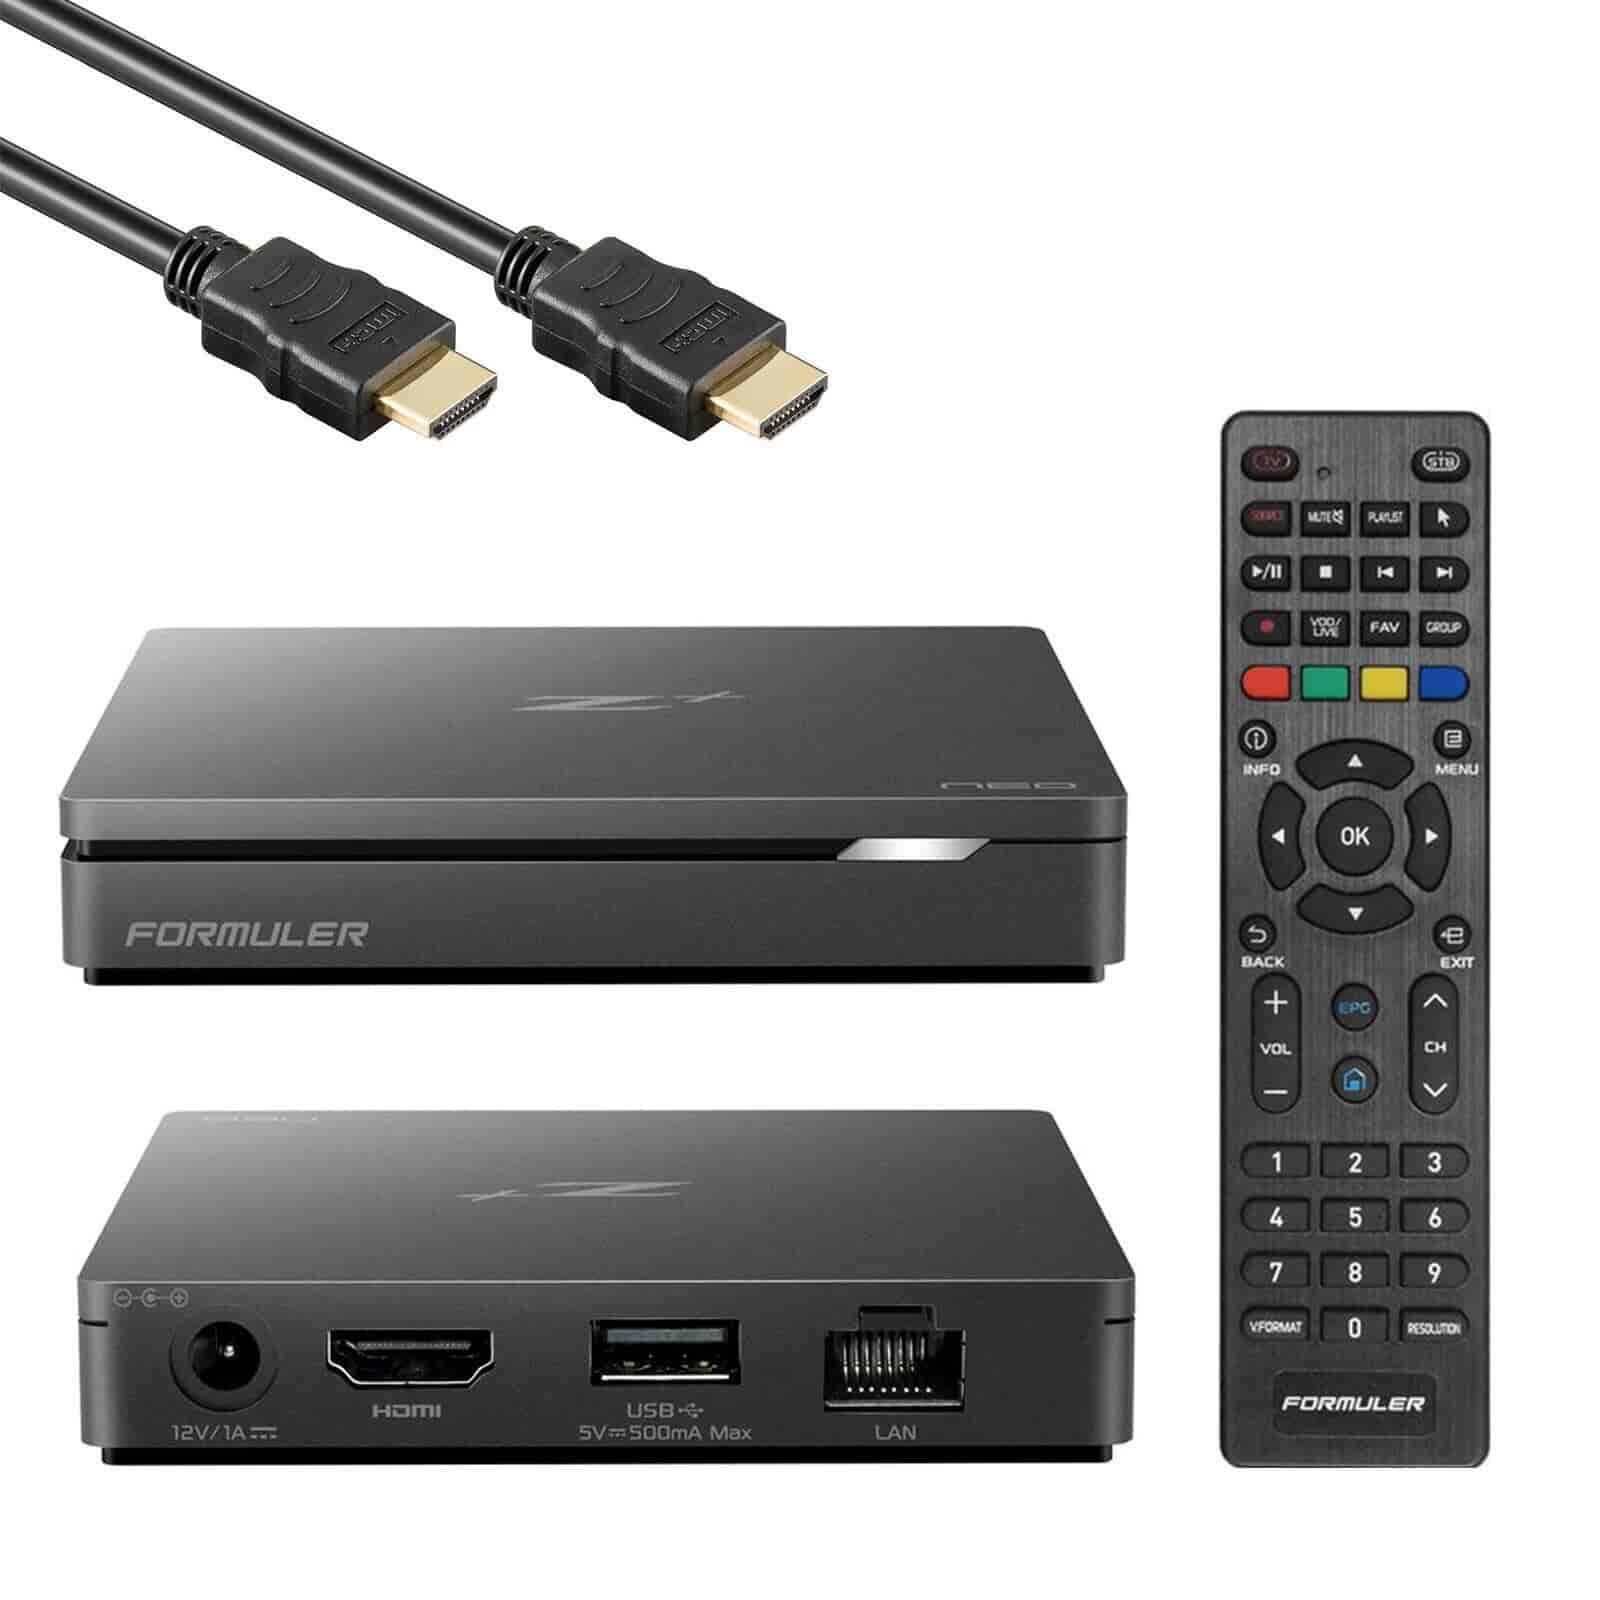 Formuler Z+ Neo 4K Android IPTV Media Player H.265 HEVC 2.4 GHz WiFiWith the new Formula Z+ Neo, IPTV technology is available to everyone. Formula Z+ Neo is a small budget-friendly IPTV box. Real 4K IPTV box with HDMI 2.0 that supports decoding technologies such as 4K HDR, HDR10, HLG, 4K 10-bit 60fps h.265, 4K 10-bit 60fps VP9. Connects easily with cable or 2.4 GHz WiFi. Supports MYTV Online 2-IPTV middleware client.Formuler